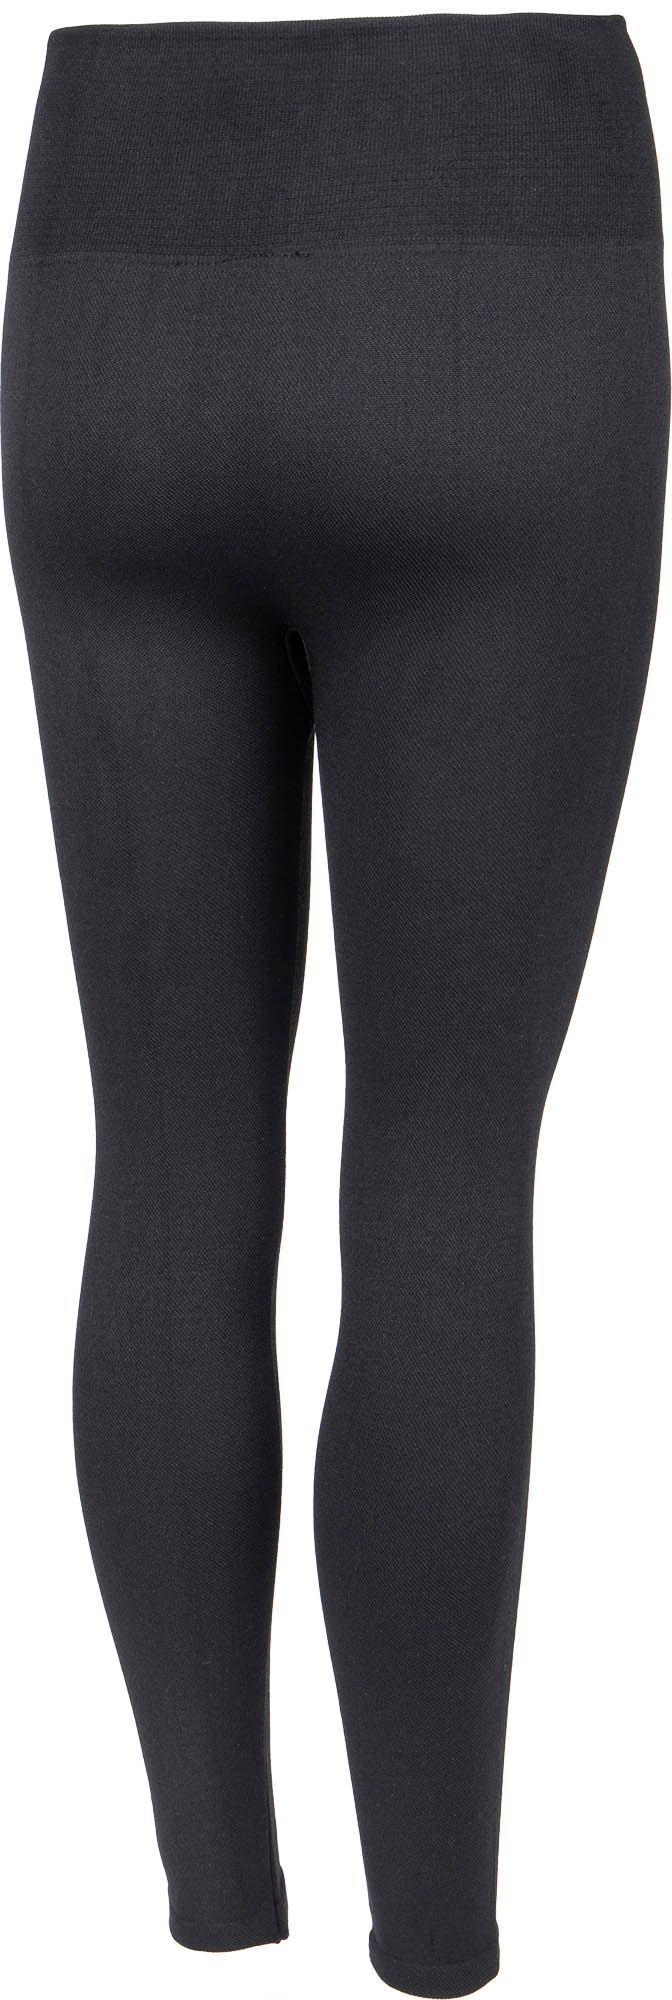 Women's insulated tights